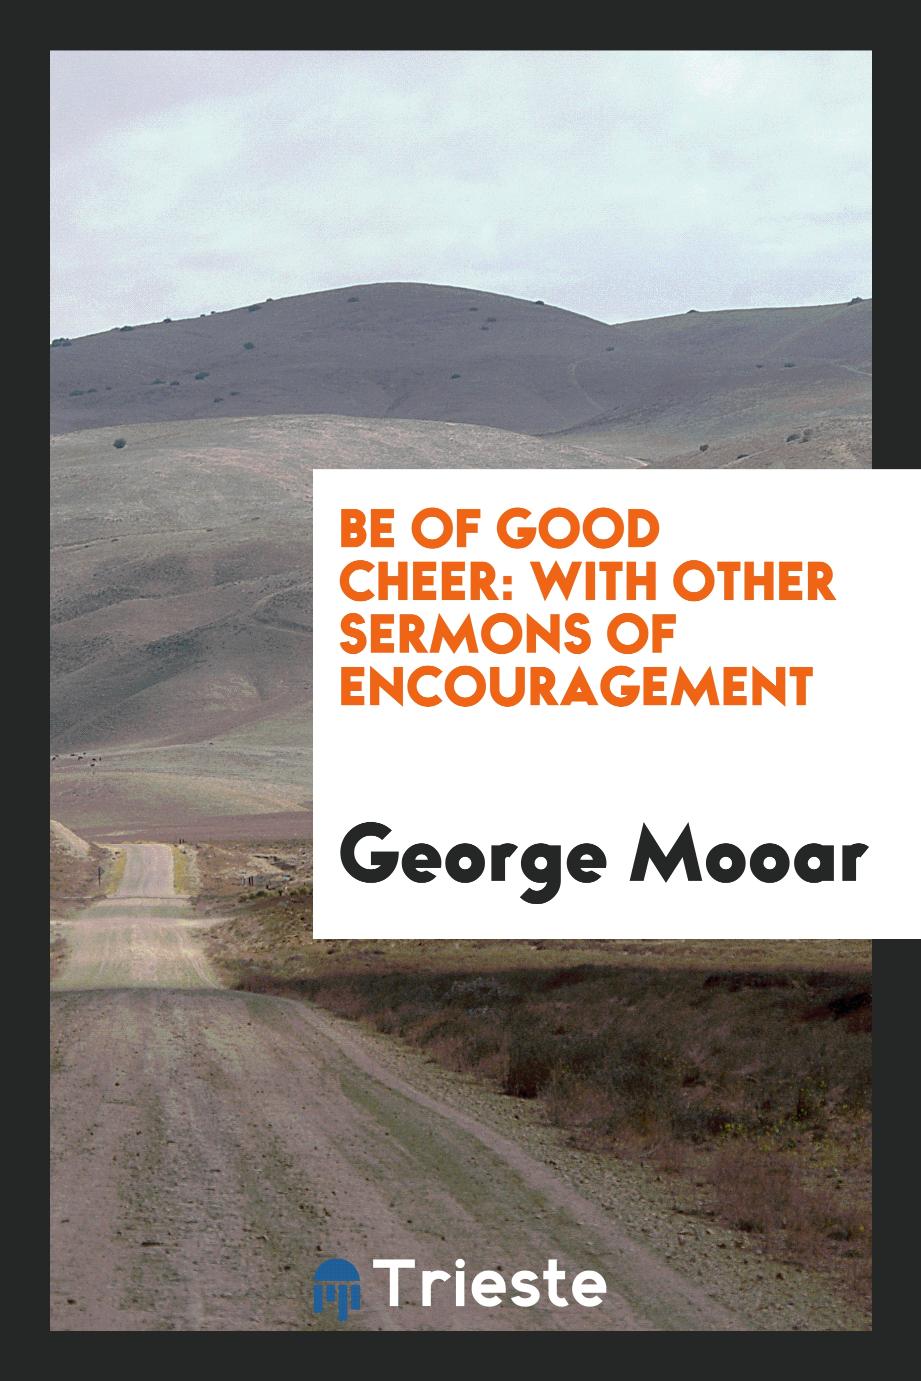 Be of good cheer: with other sermons of encouragement